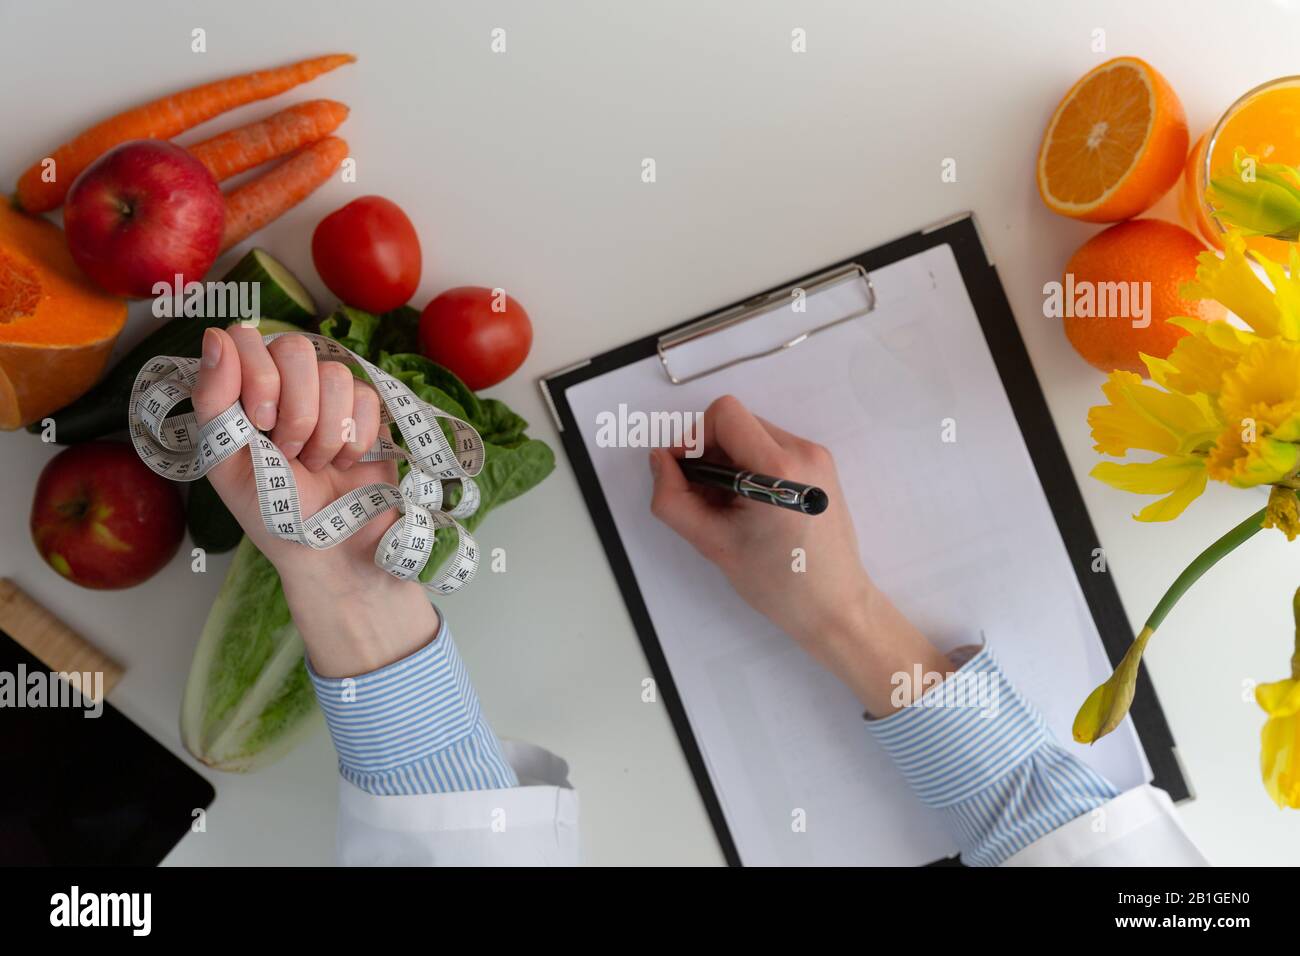 Vegetable diet nutrition and medication concept. Nutritionist offers healthy vegetables diet. In a natural light Stock Photo